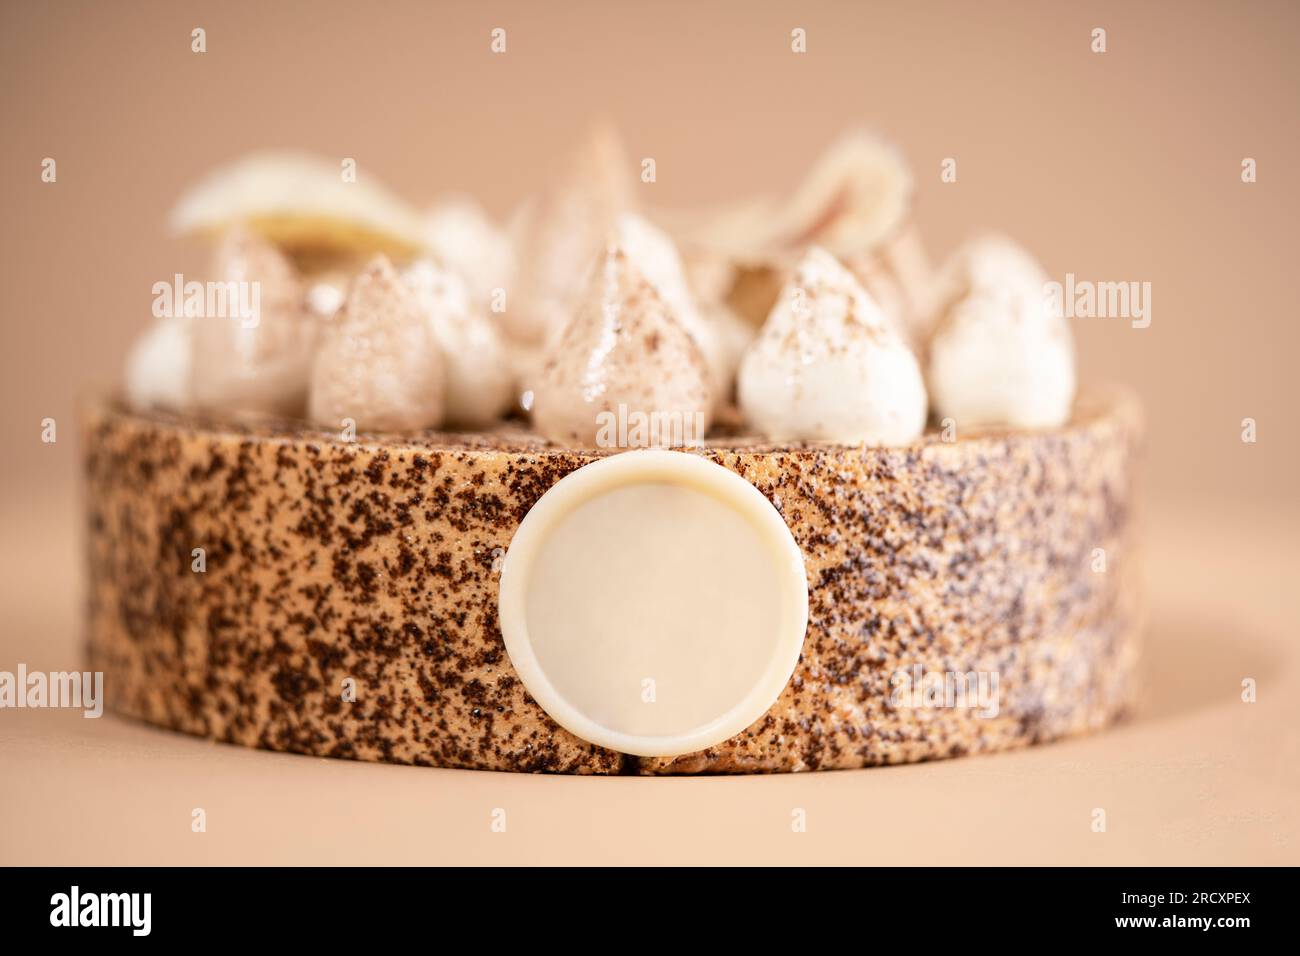 A delicious-looking dessert of a round cake on a brown plate, topped with a generous helping of fluffy white whipped cream Stock Photo